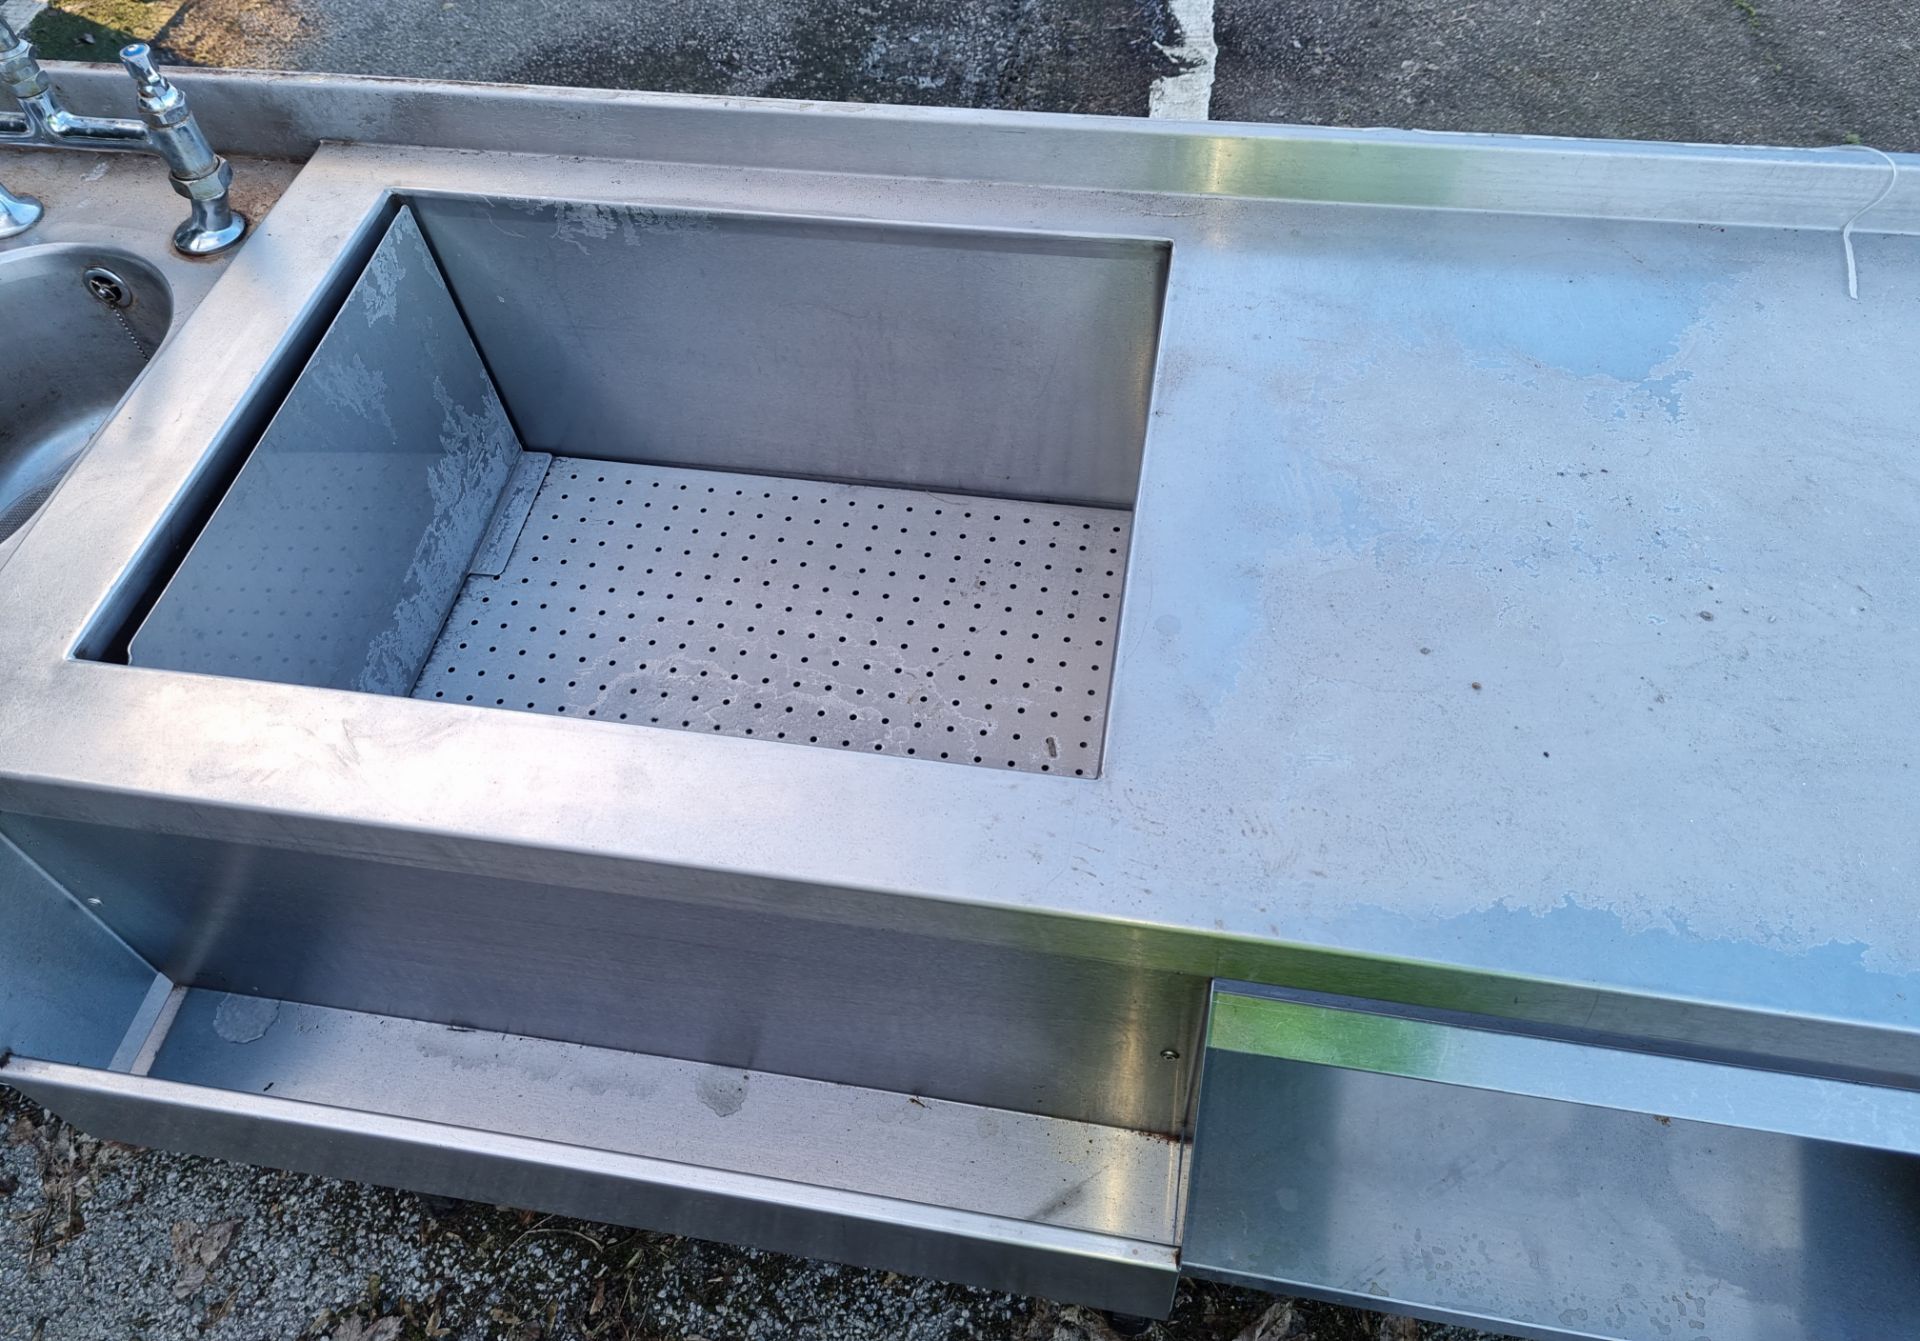 Stainless steel large multifunction wash table with double basin/sink - L2930 x D700 x H950mm - Image 3 of 4